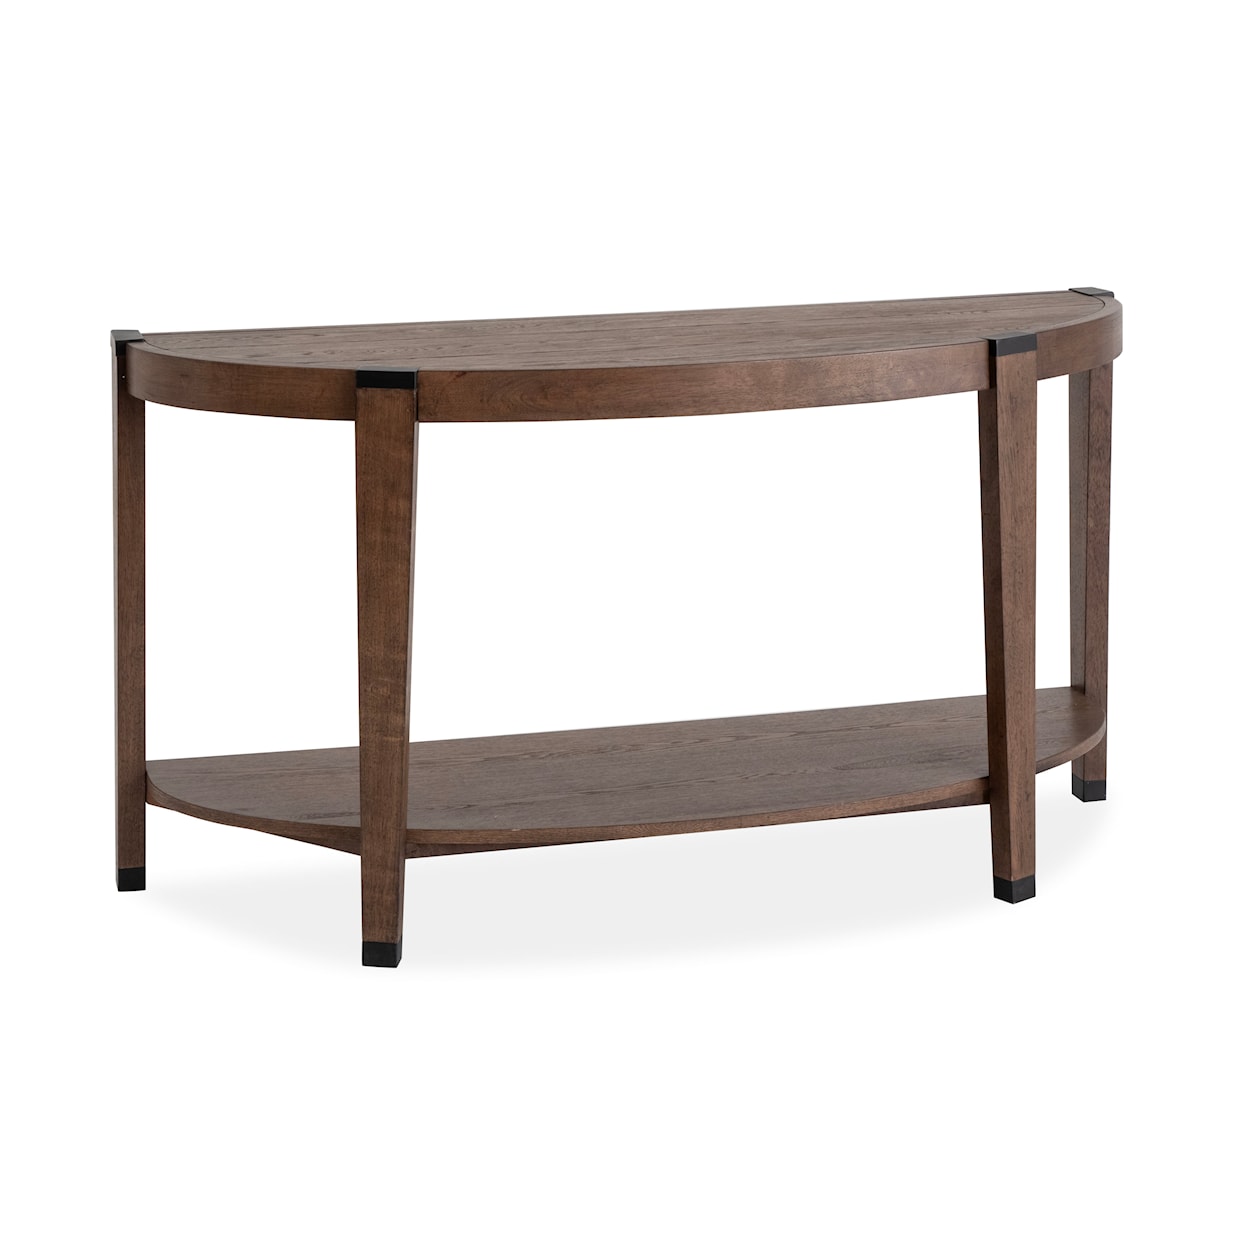 Magnussen Home Kaysen Tables Transitional Sofa Table